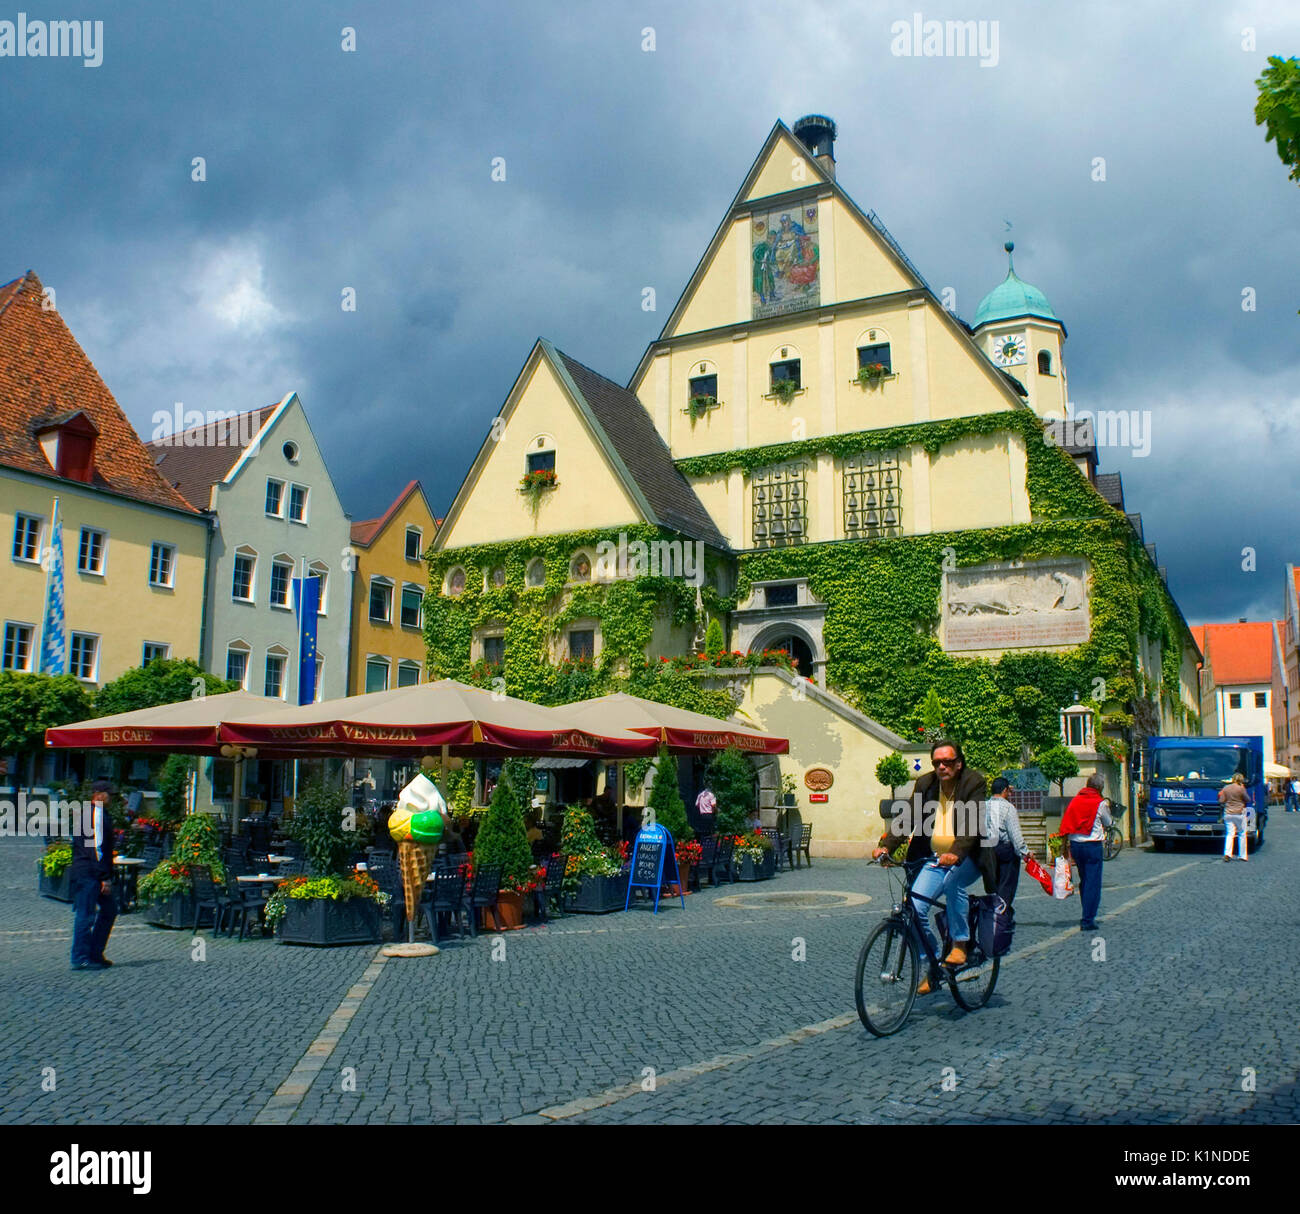 Weiden, Bavaria, Germany - July 7, 2009: The old courthouse dominates the town square, sporting a glockenspiel on the facade. Stock Photo